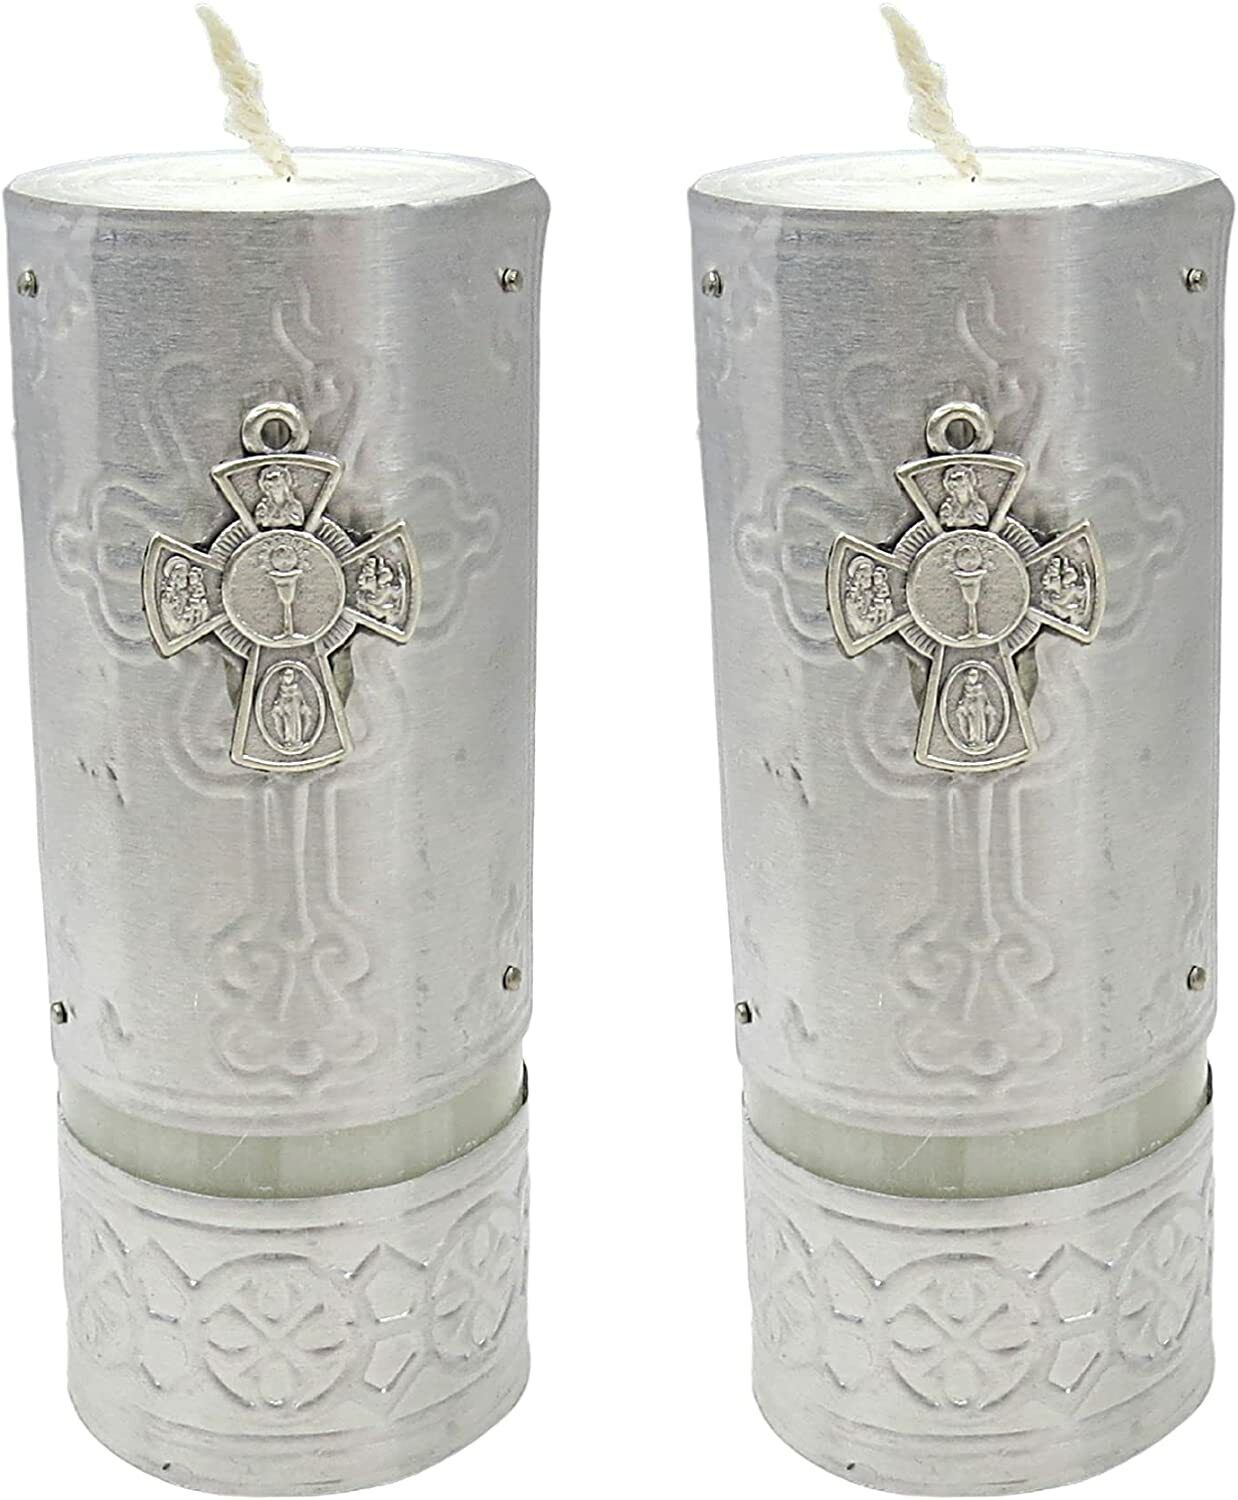 Small Sliver Toned Pillar Candle With Cross Pendant Charm Gift, 2 Pack, 4.5 In